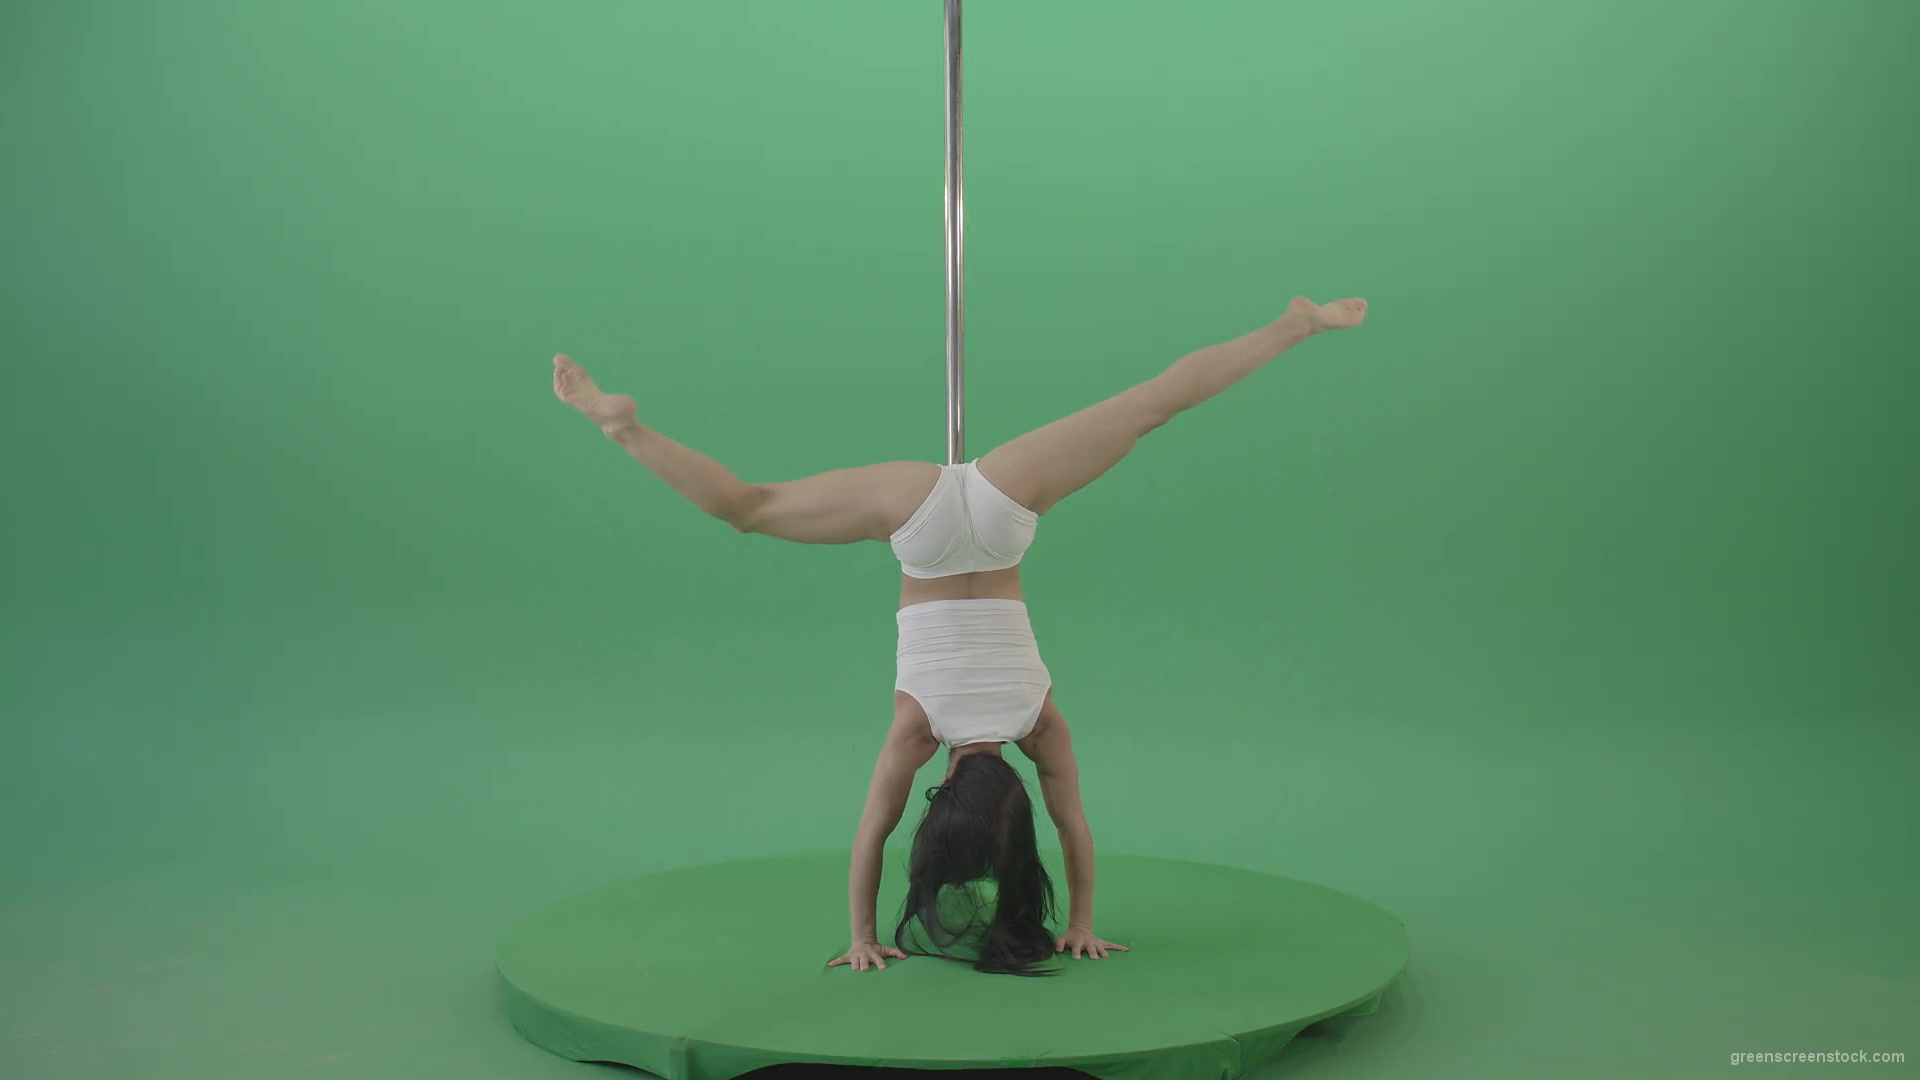 Pole-Dance-Girl-waving-two-legs-isolated-on-green-screen-4K-Video-Footage-1920_002 Green Screen Stock